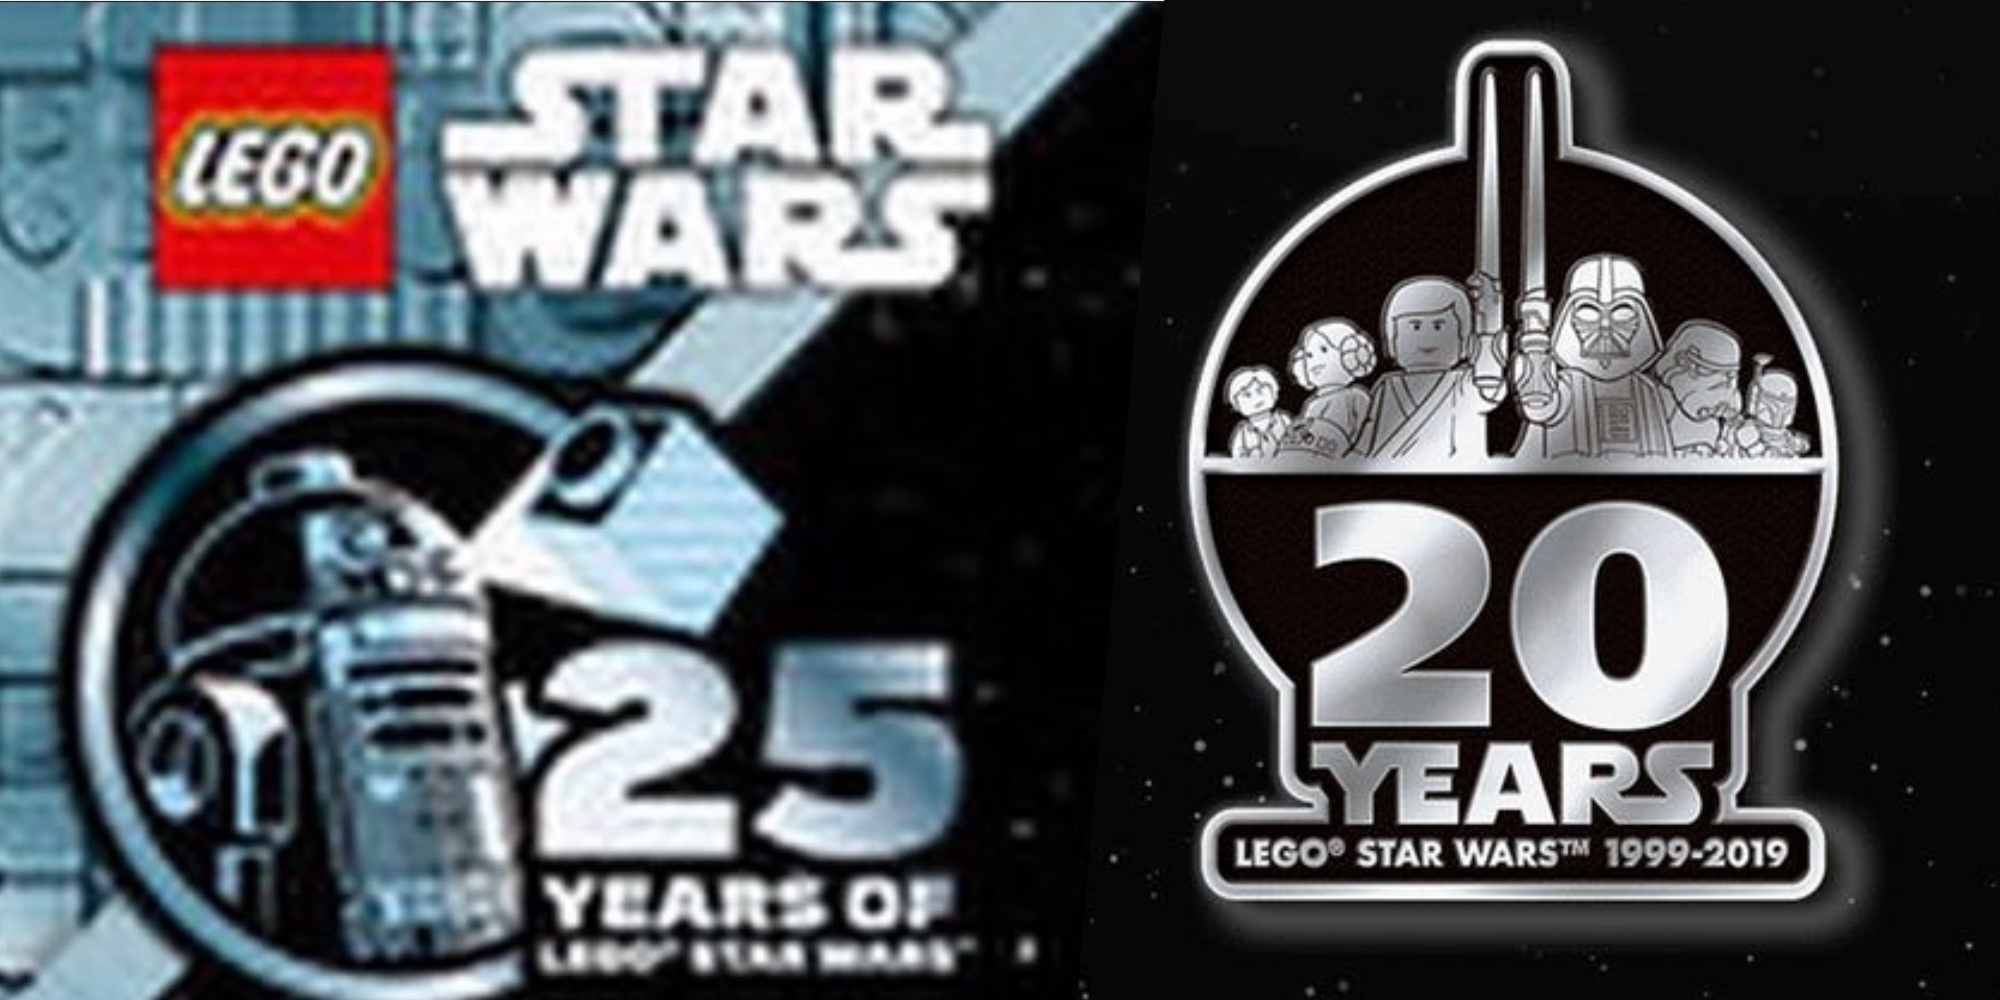 LEGO Star Wars 25th anniversary logo has been revealed